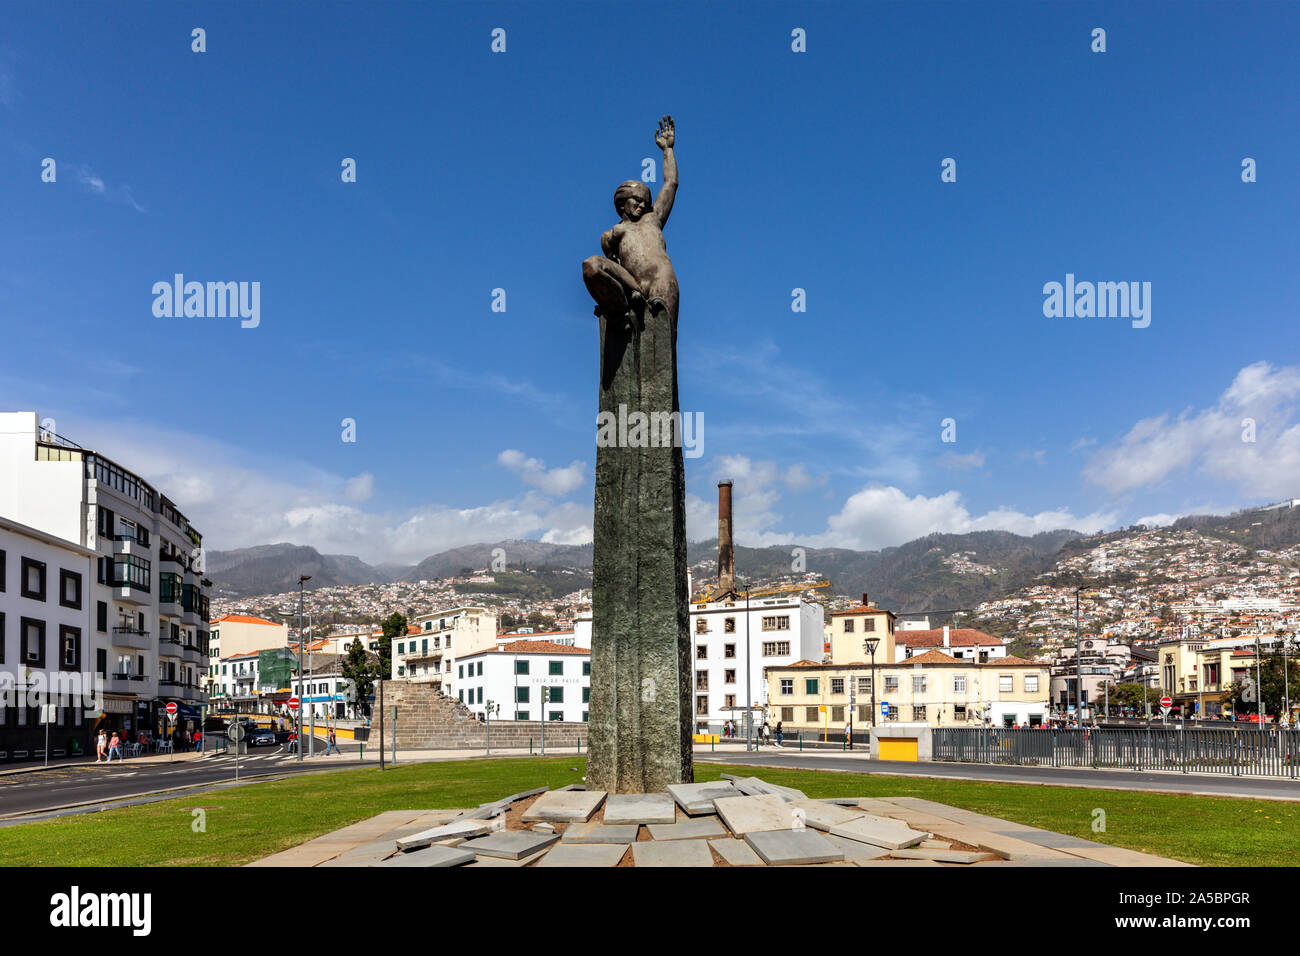 Statue sculpted in bronze and concrete plaques, Praça da Autonomia in Funchal Madeira to commemorate the granting of Autonomy to the Island in 1976 Stock Photo